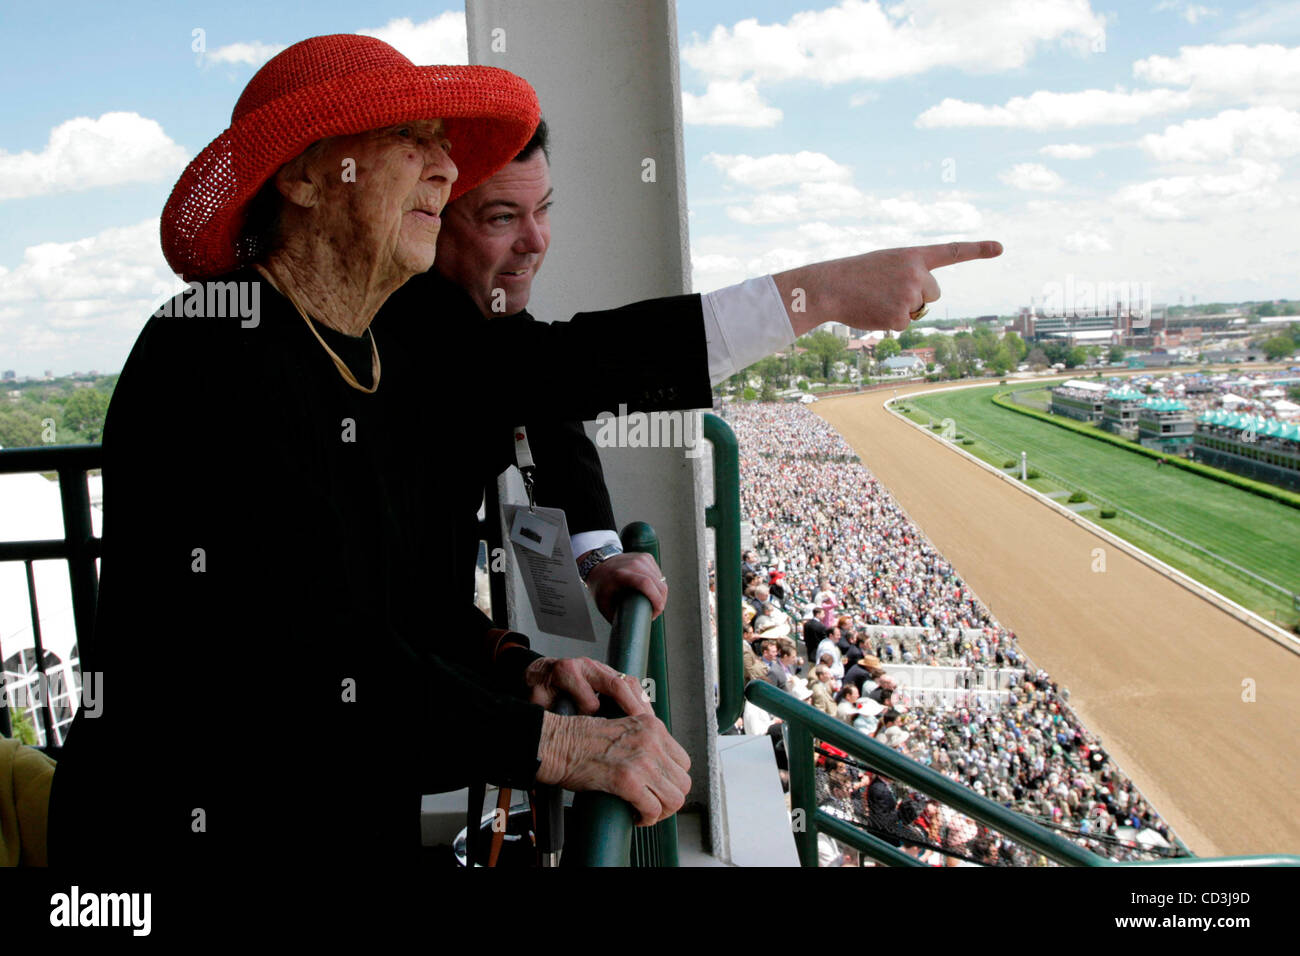 Dorothy Feltner Davis, oldest working journalist at the Derby, looks over Churchill Downs with Darren Rogers, senior director of Communications and media services, from the Media Center at the 134th running of the Kentucky Derby Saturday May 3, 2008, at Churchill Downs, Louisville, Ky. Photo by Ange Stock Photo